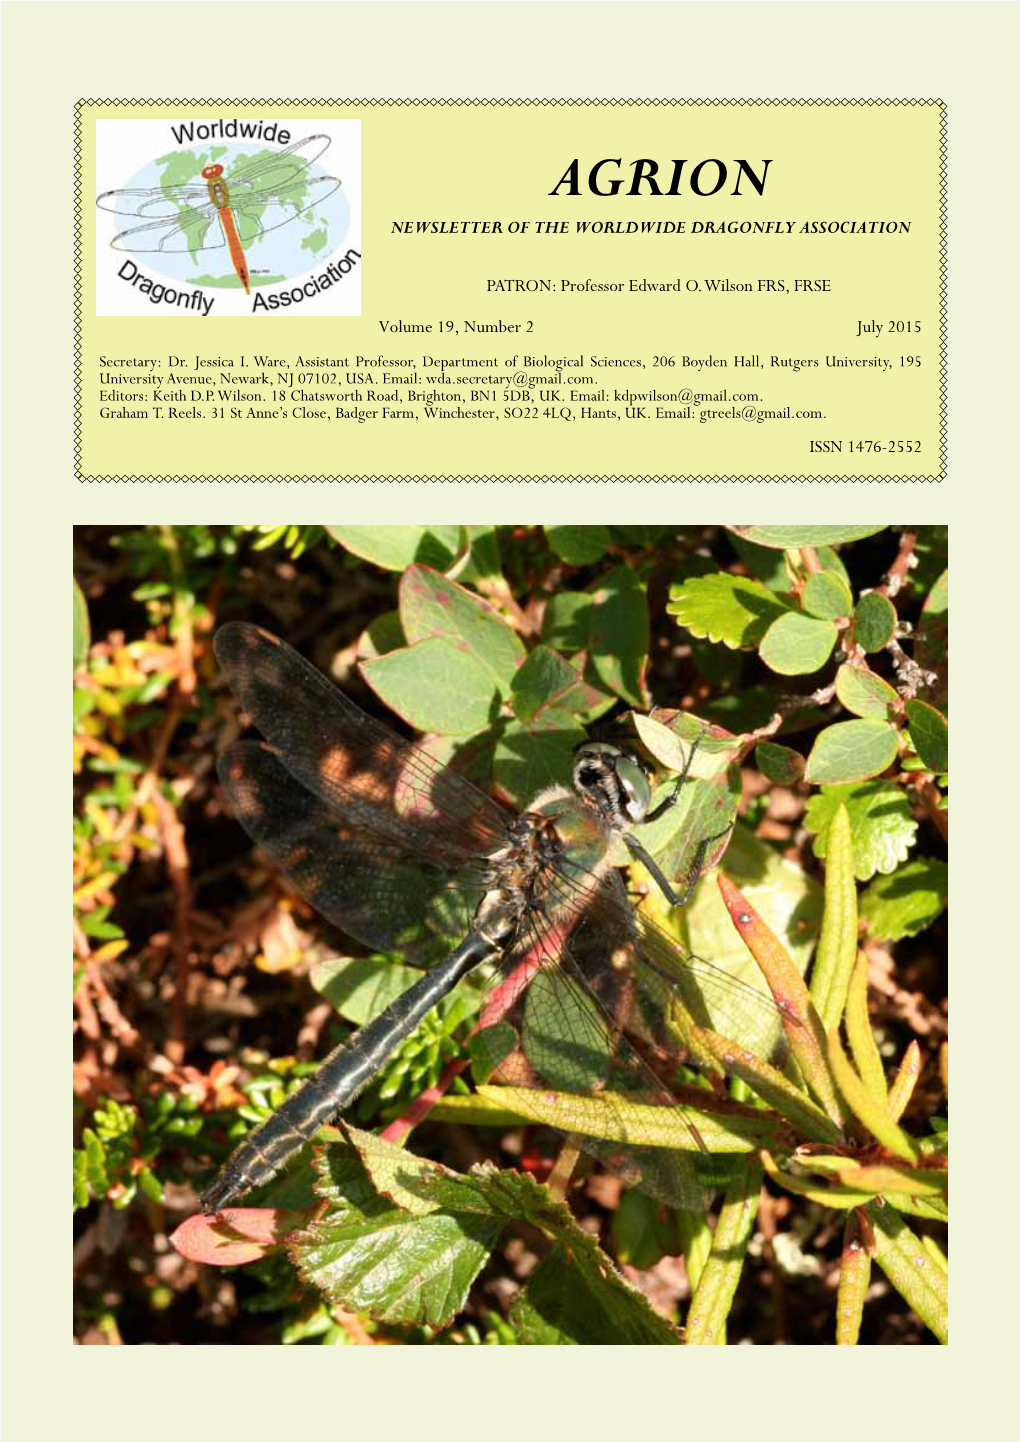 Agrion 19(2) - July 2015 AGRION NEWSLETTER of the WORLDWIDE DRAGONFLY ASSOCIATION